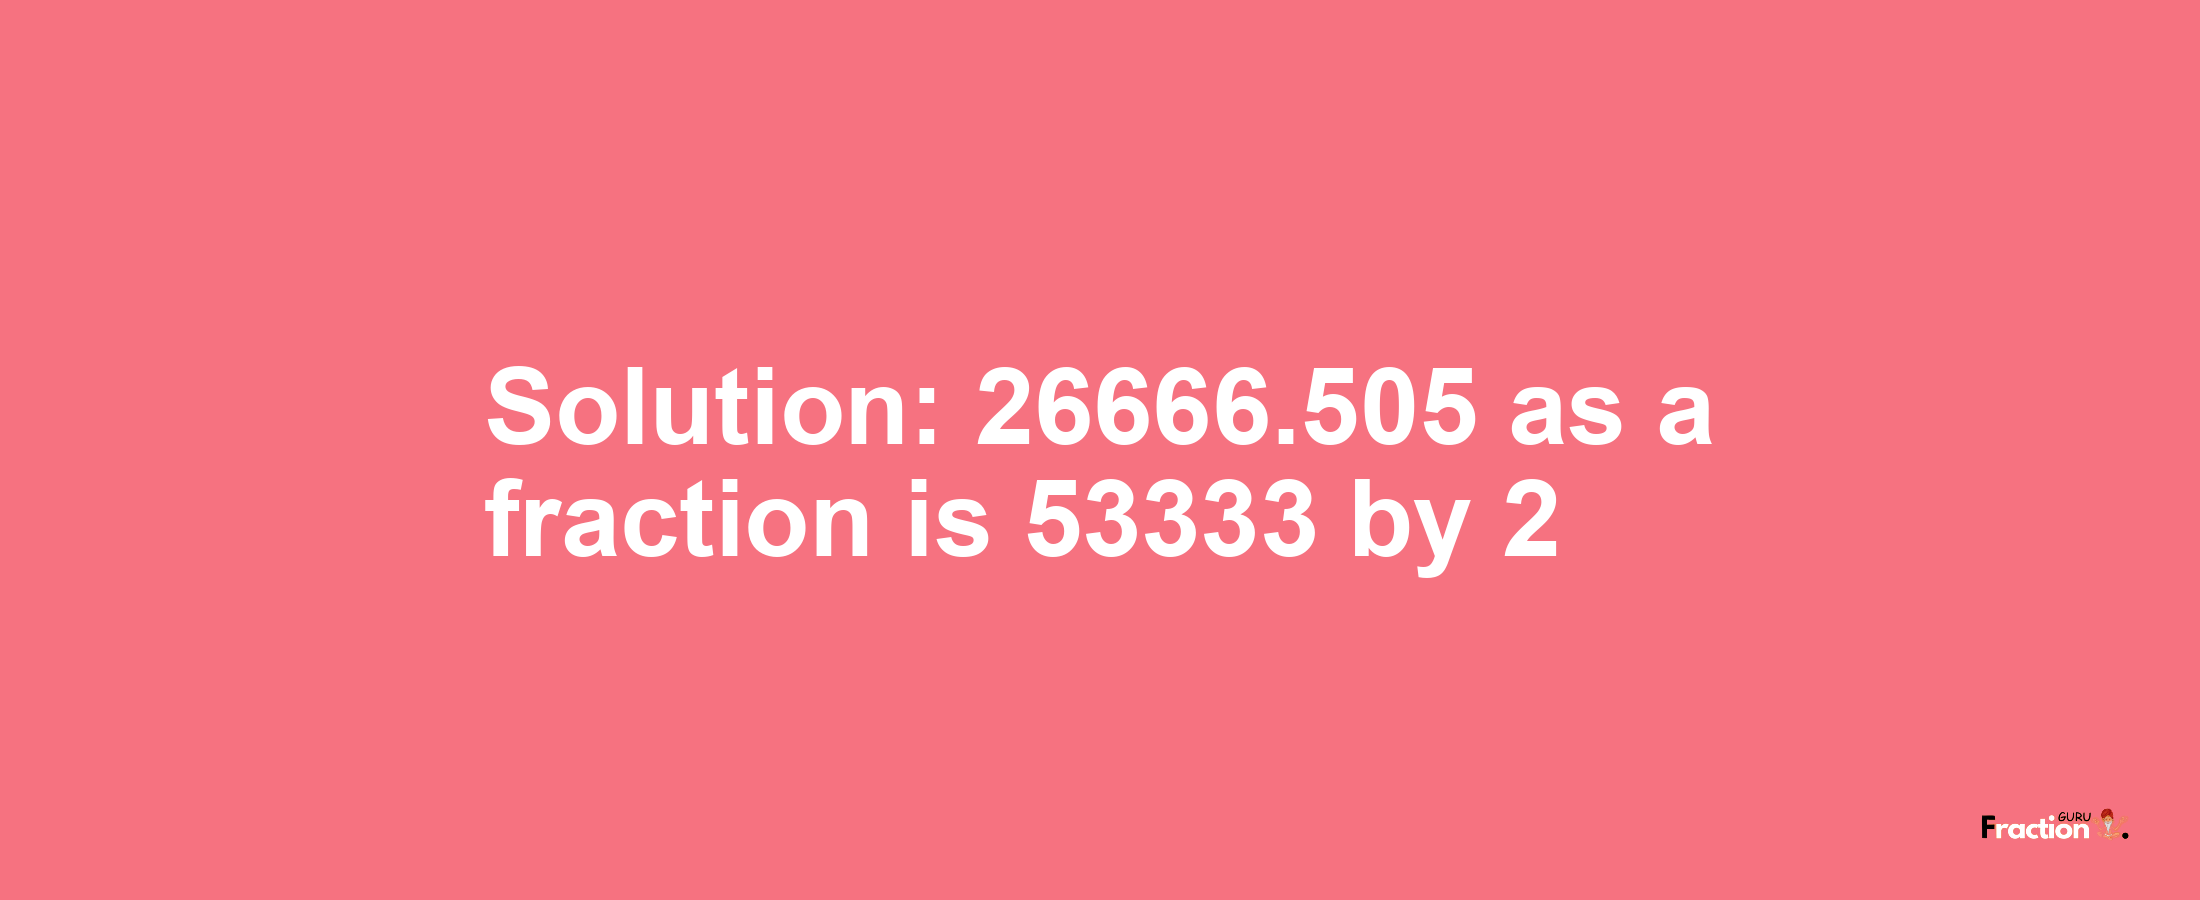 Solution:26666.505 as a fraction is 53333/2